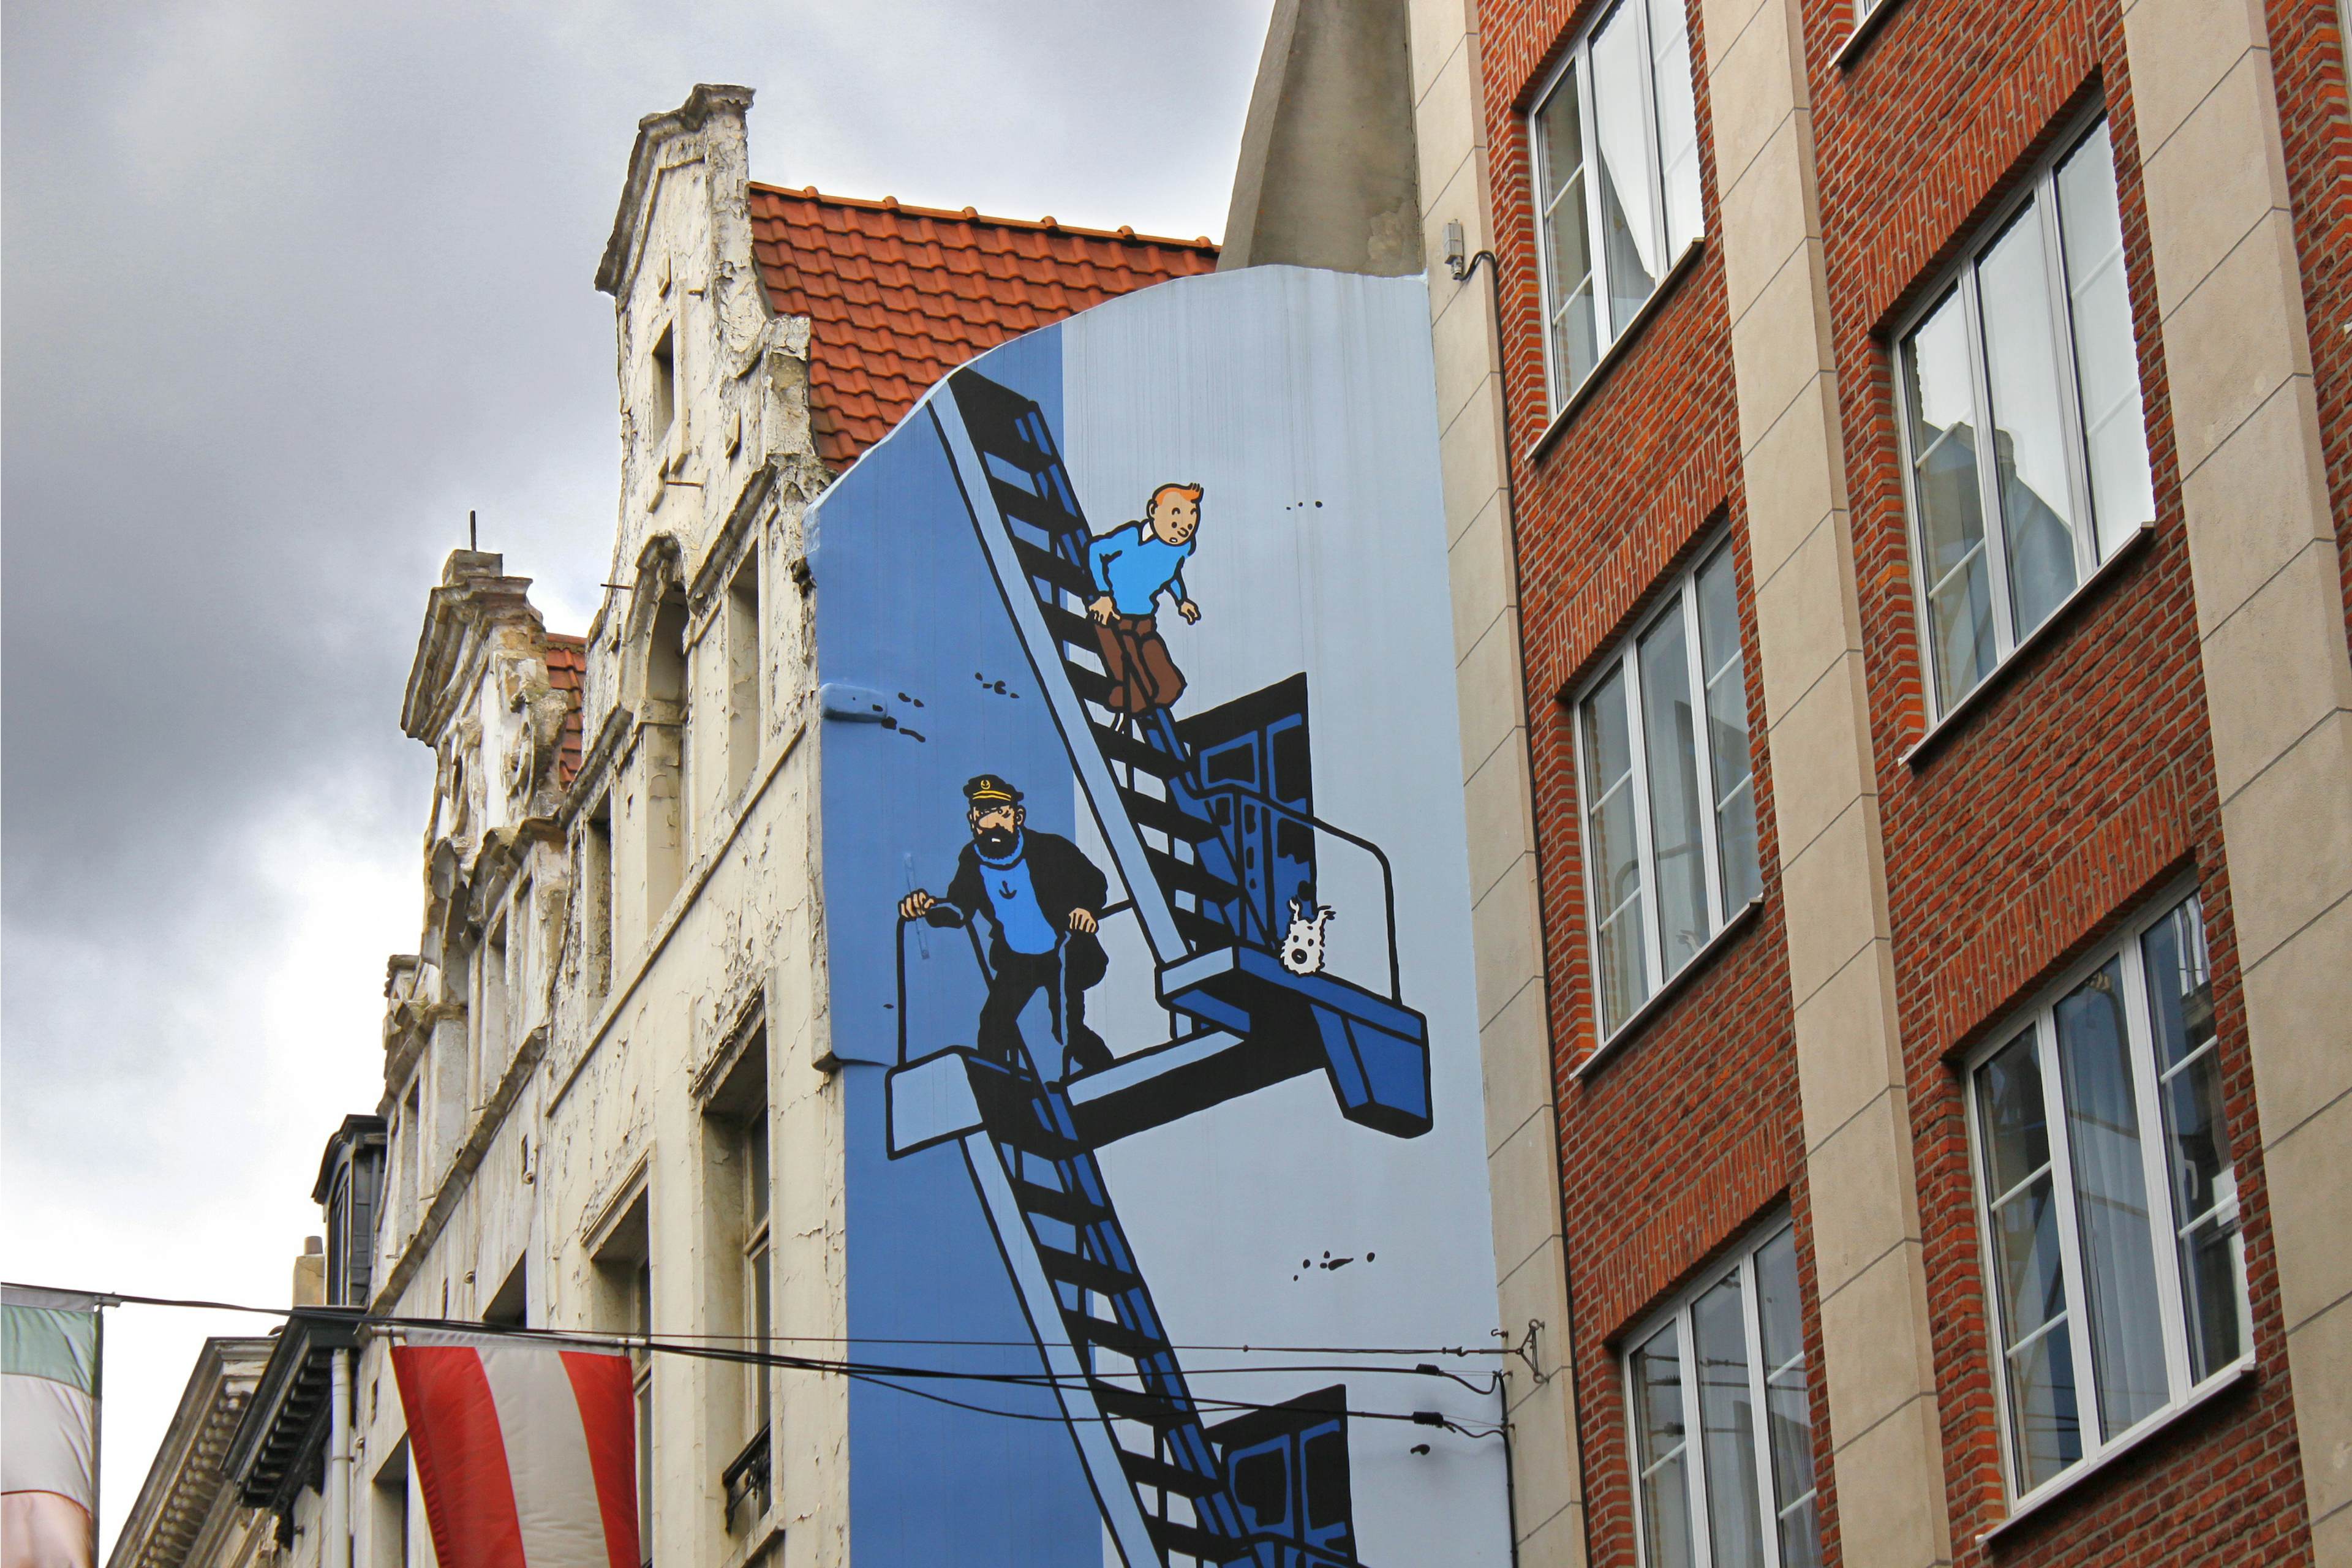 Brussels: Land of Comic Books